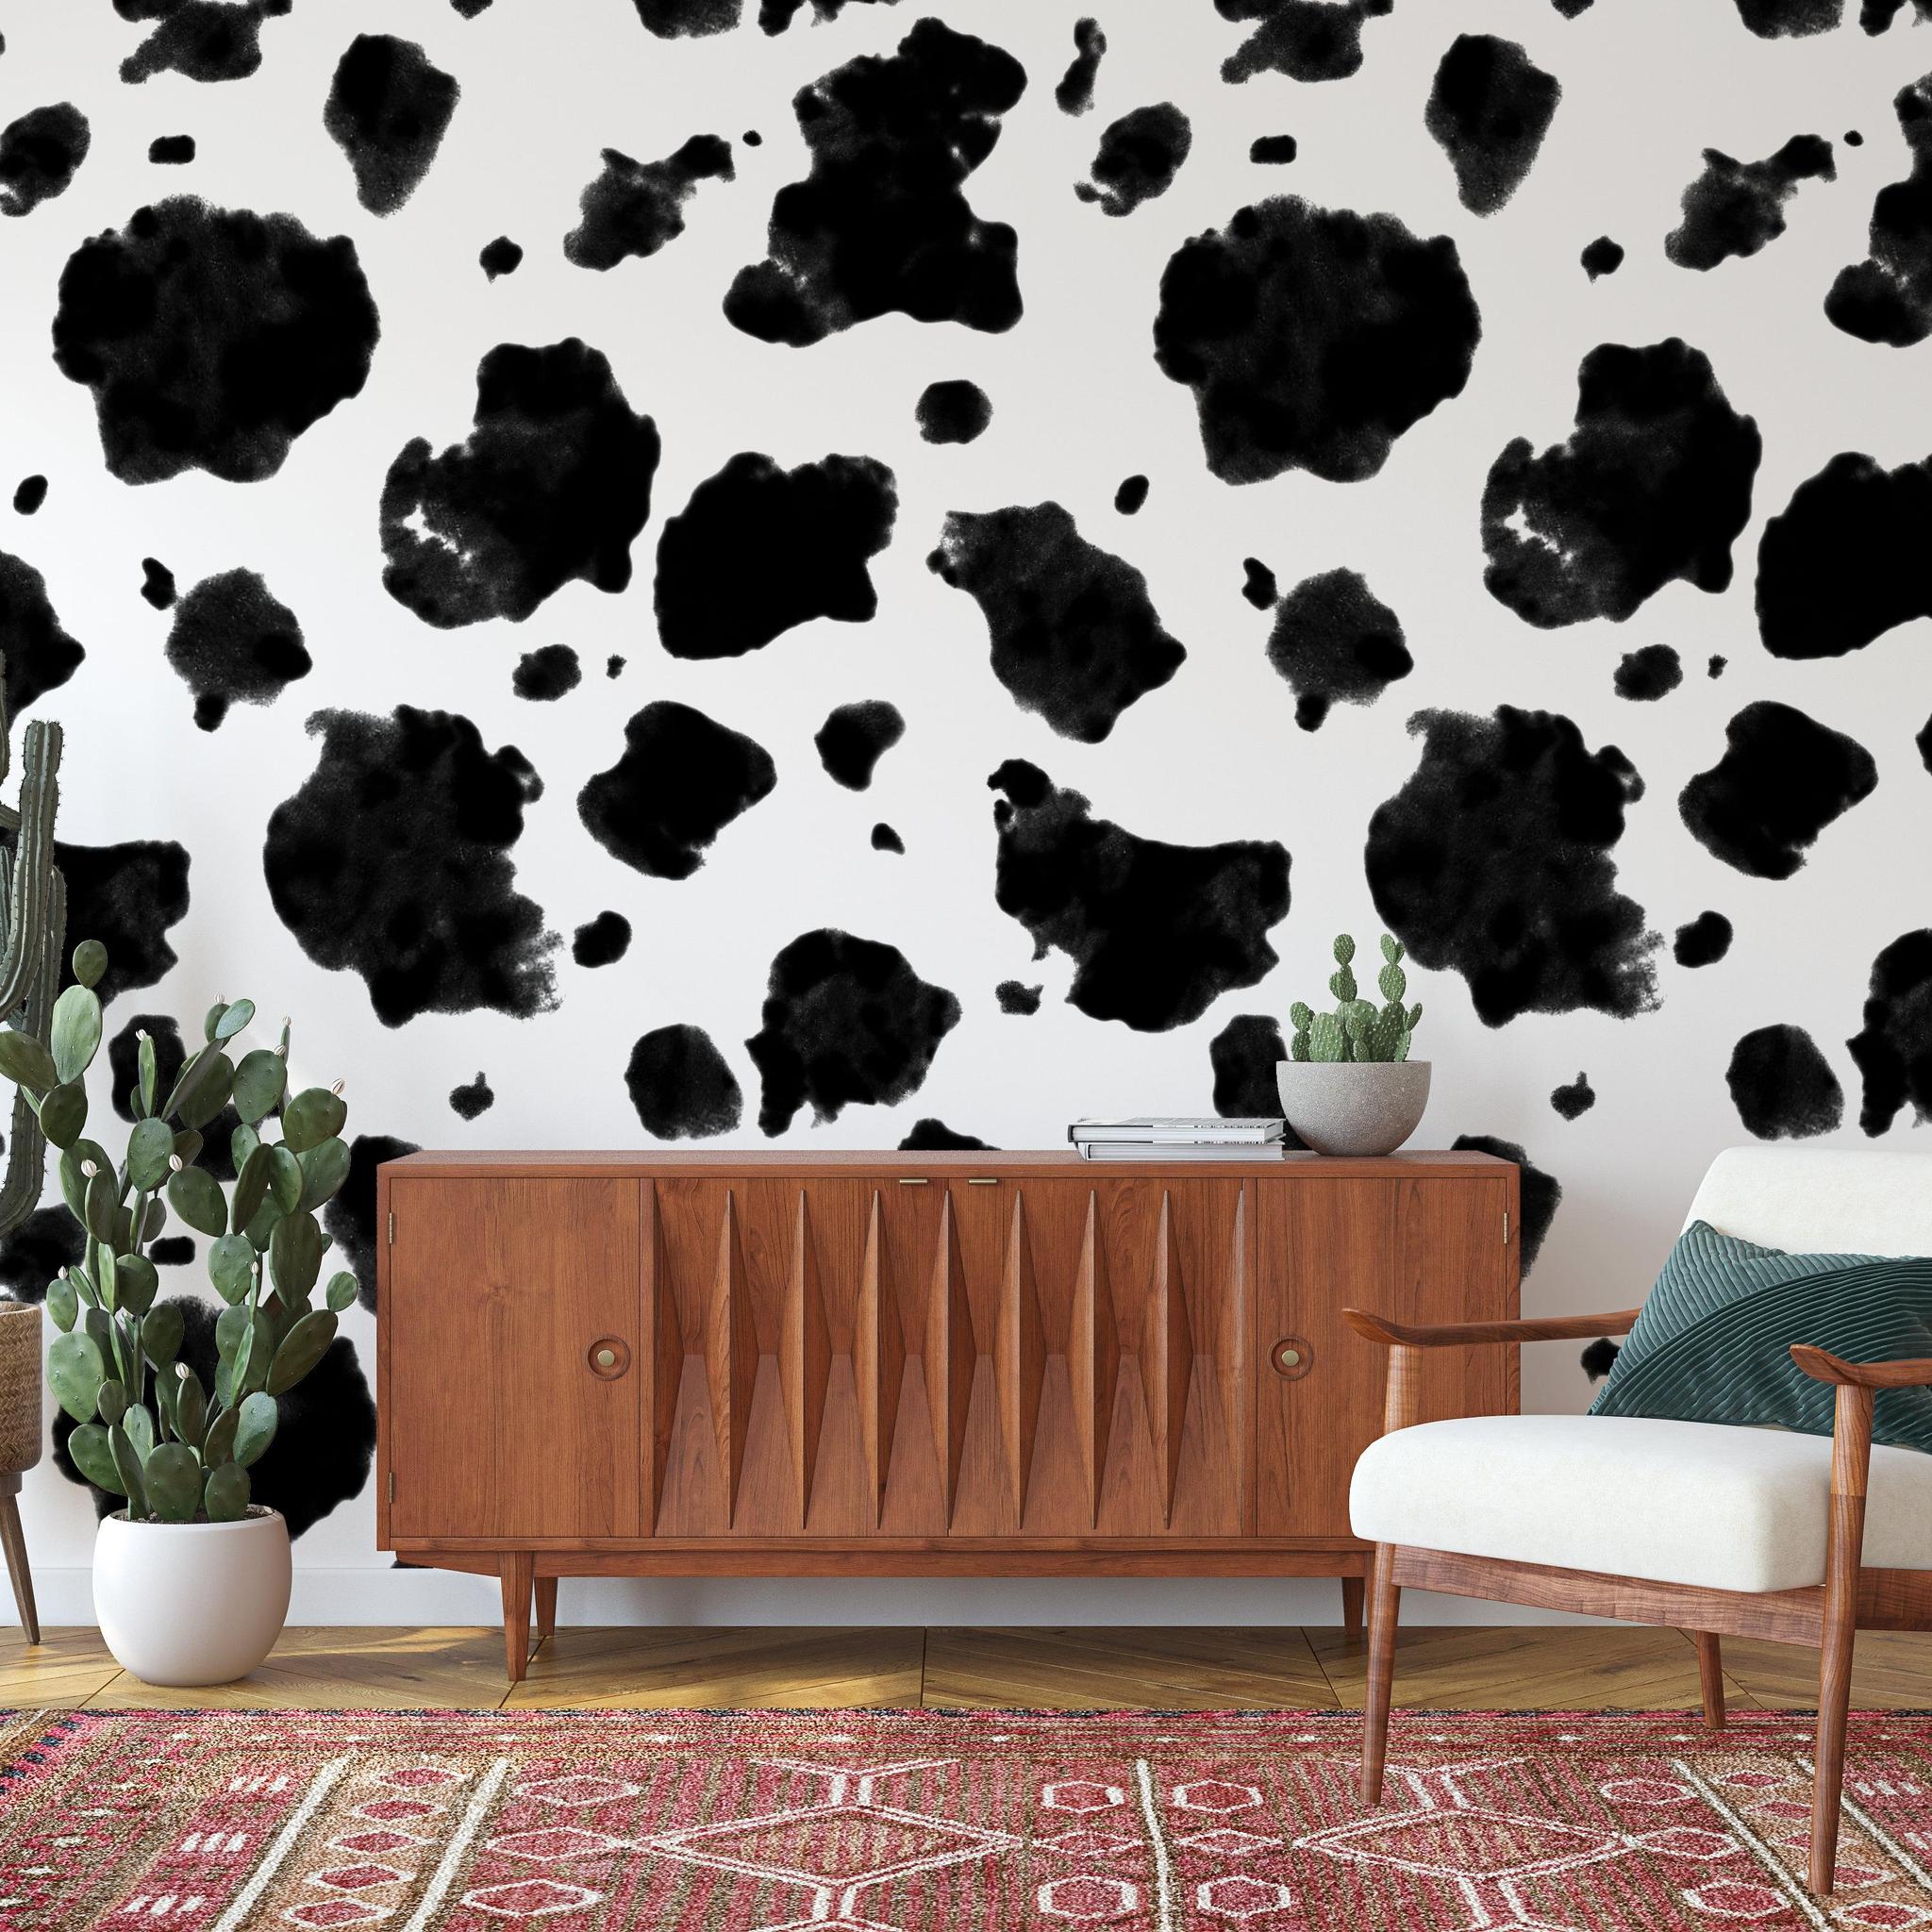 Cow Print Wall Stickers Decals Decor